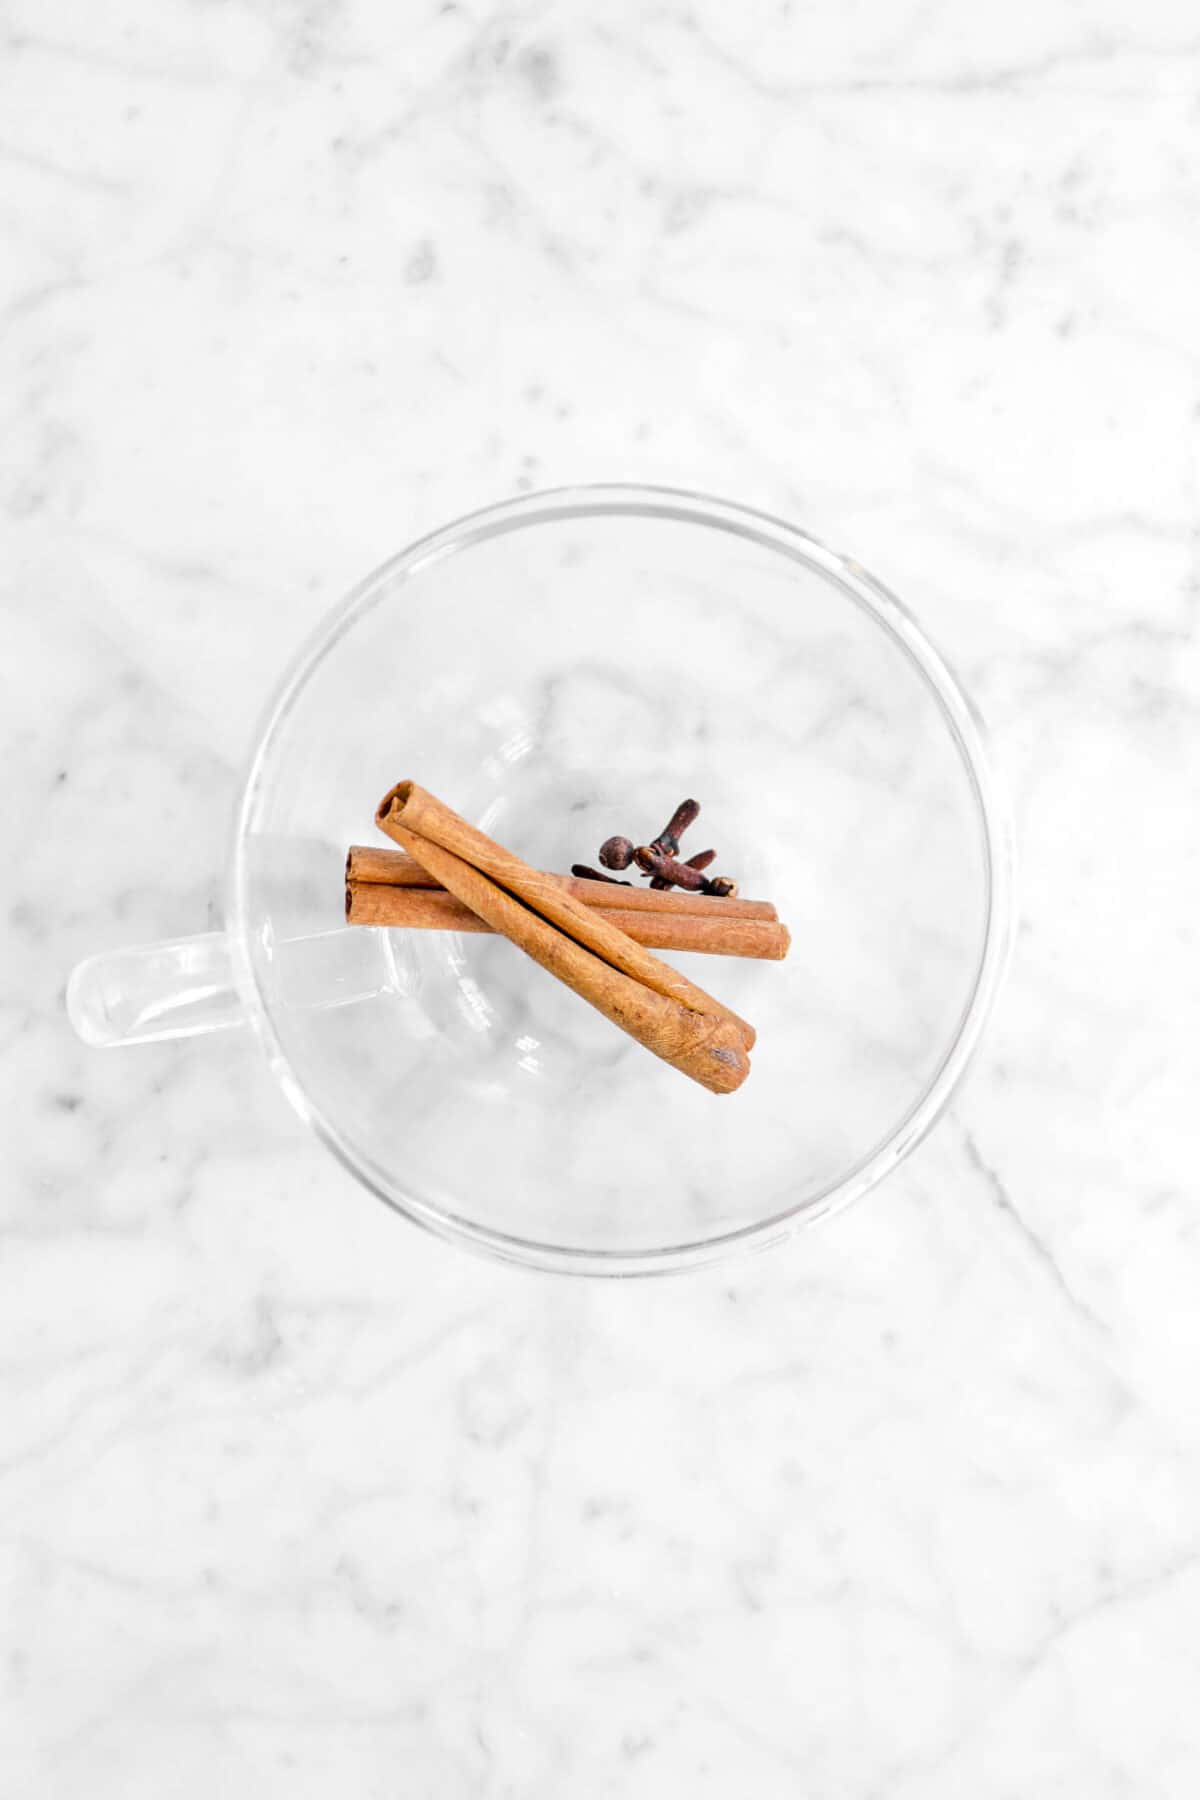 cinnamon sticks and cloves in a glass